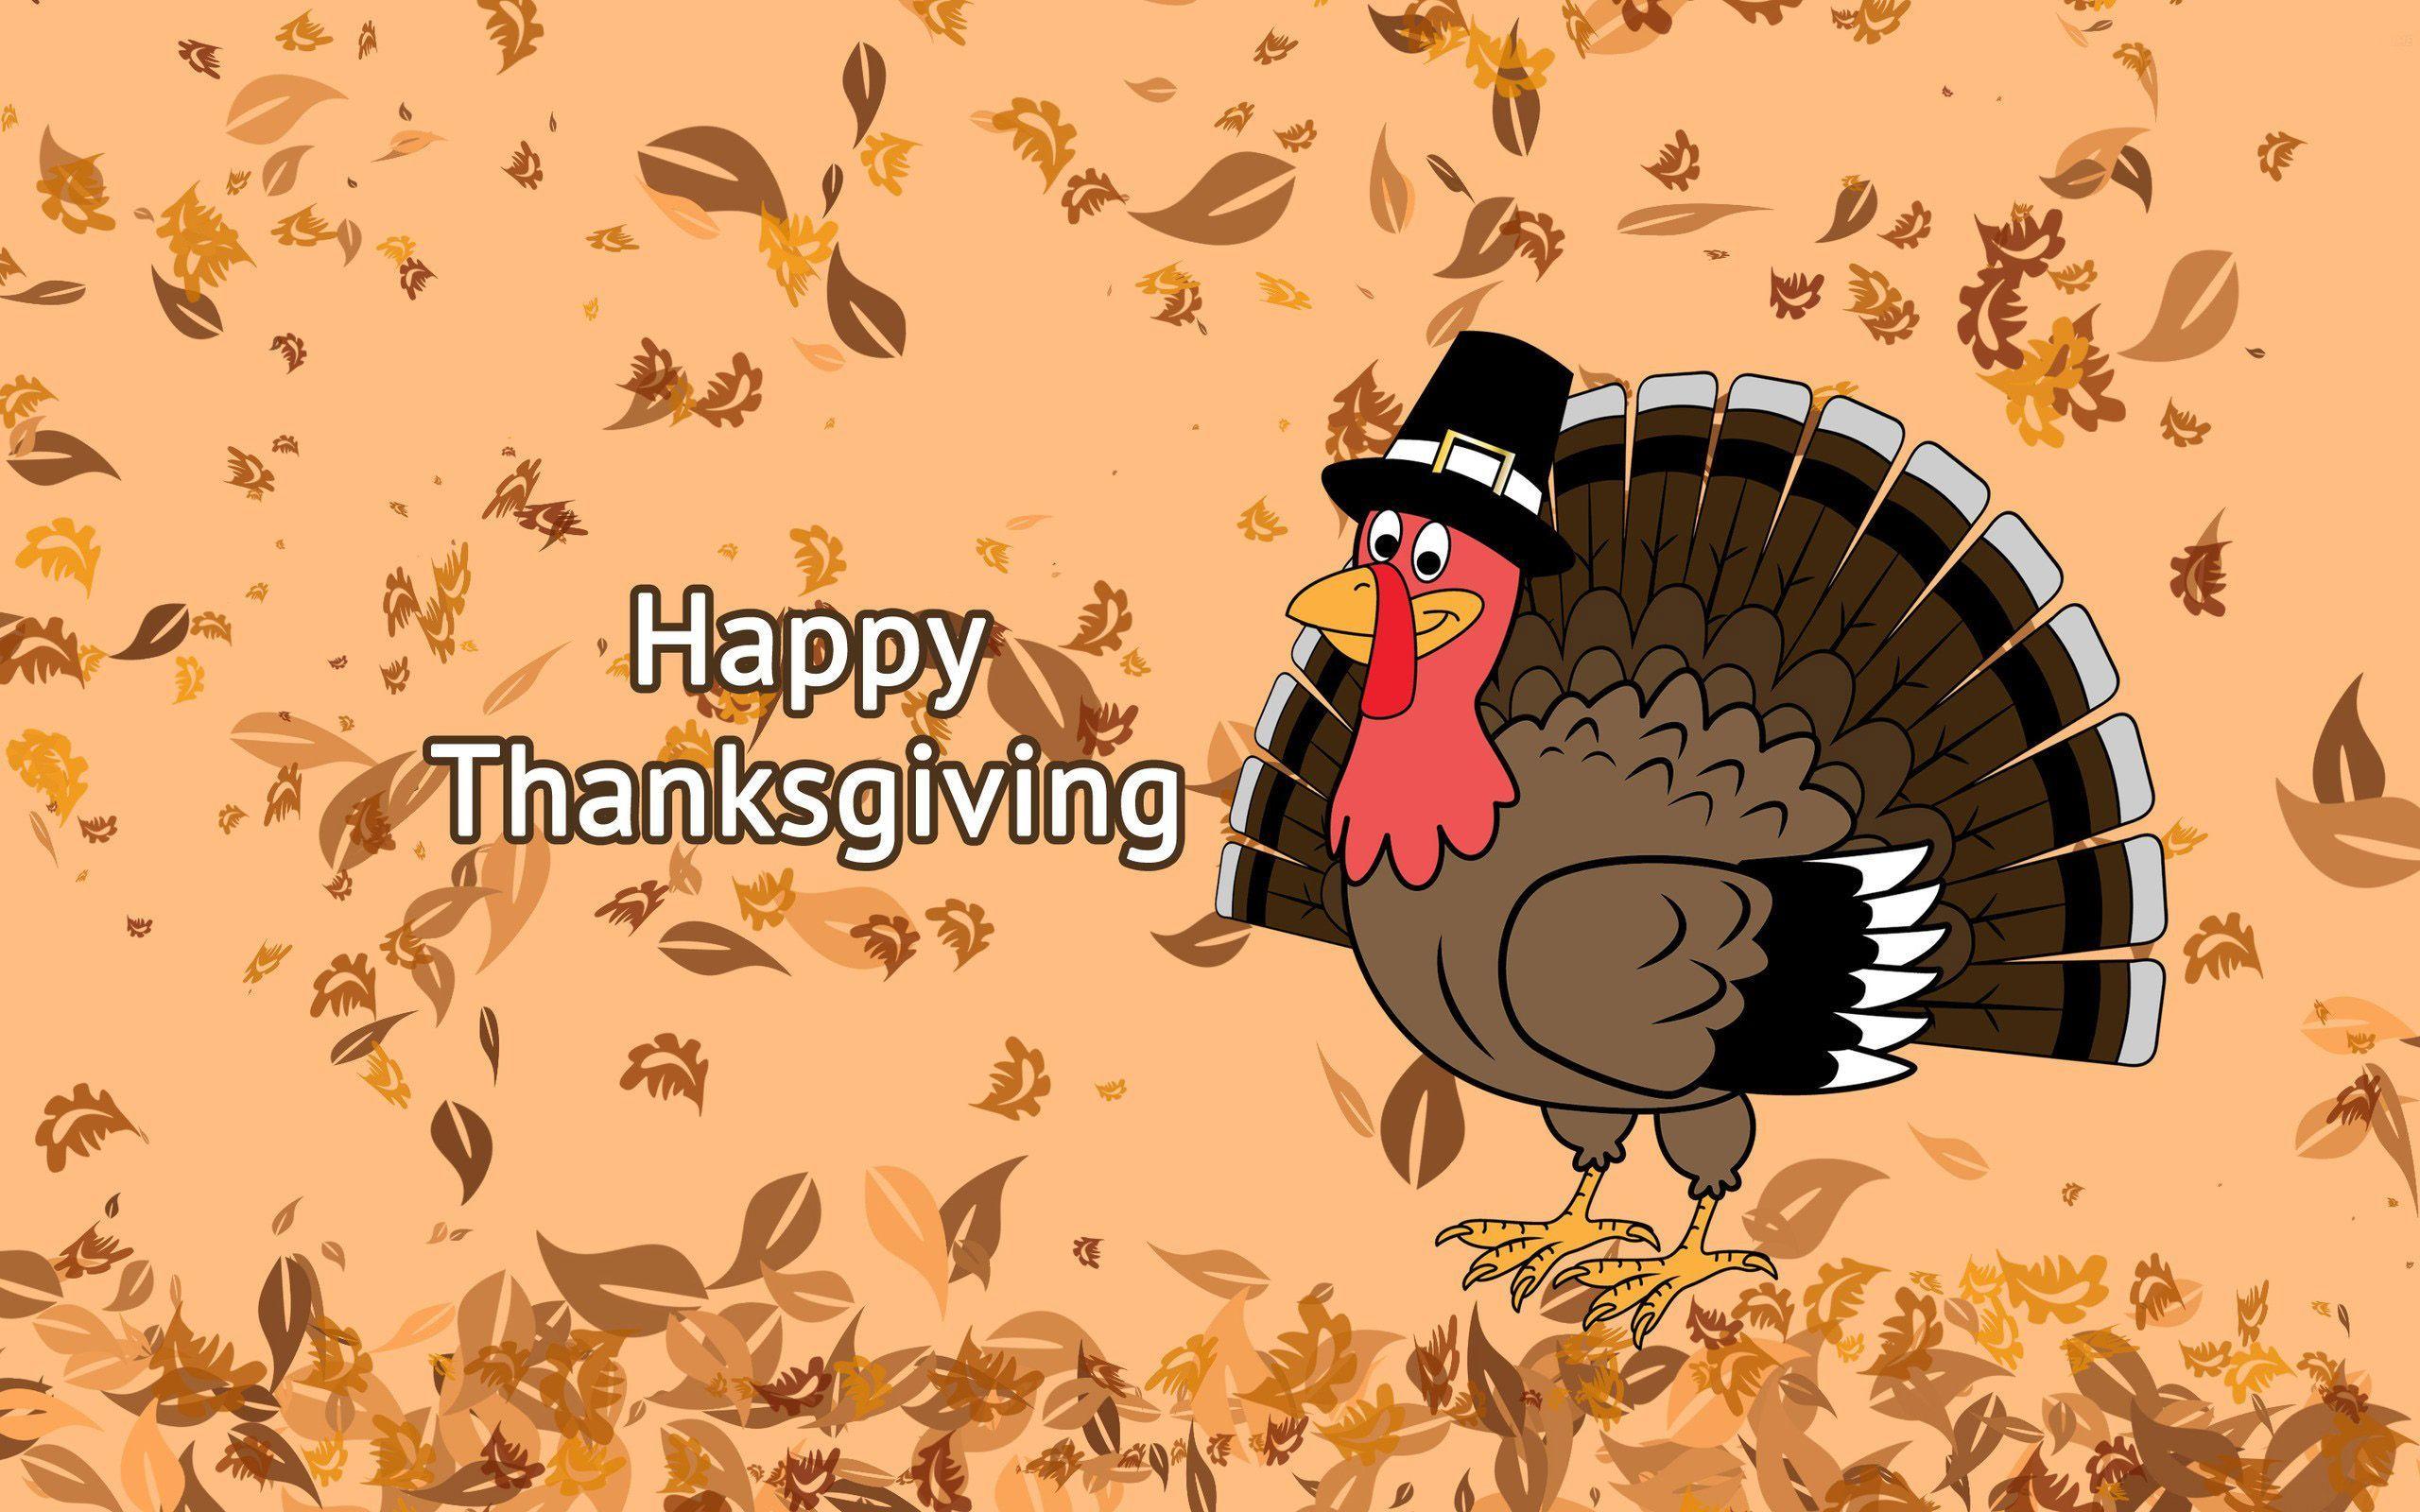 Happy Thanksgiving 2016 Image. Wallpaper, Background, Image